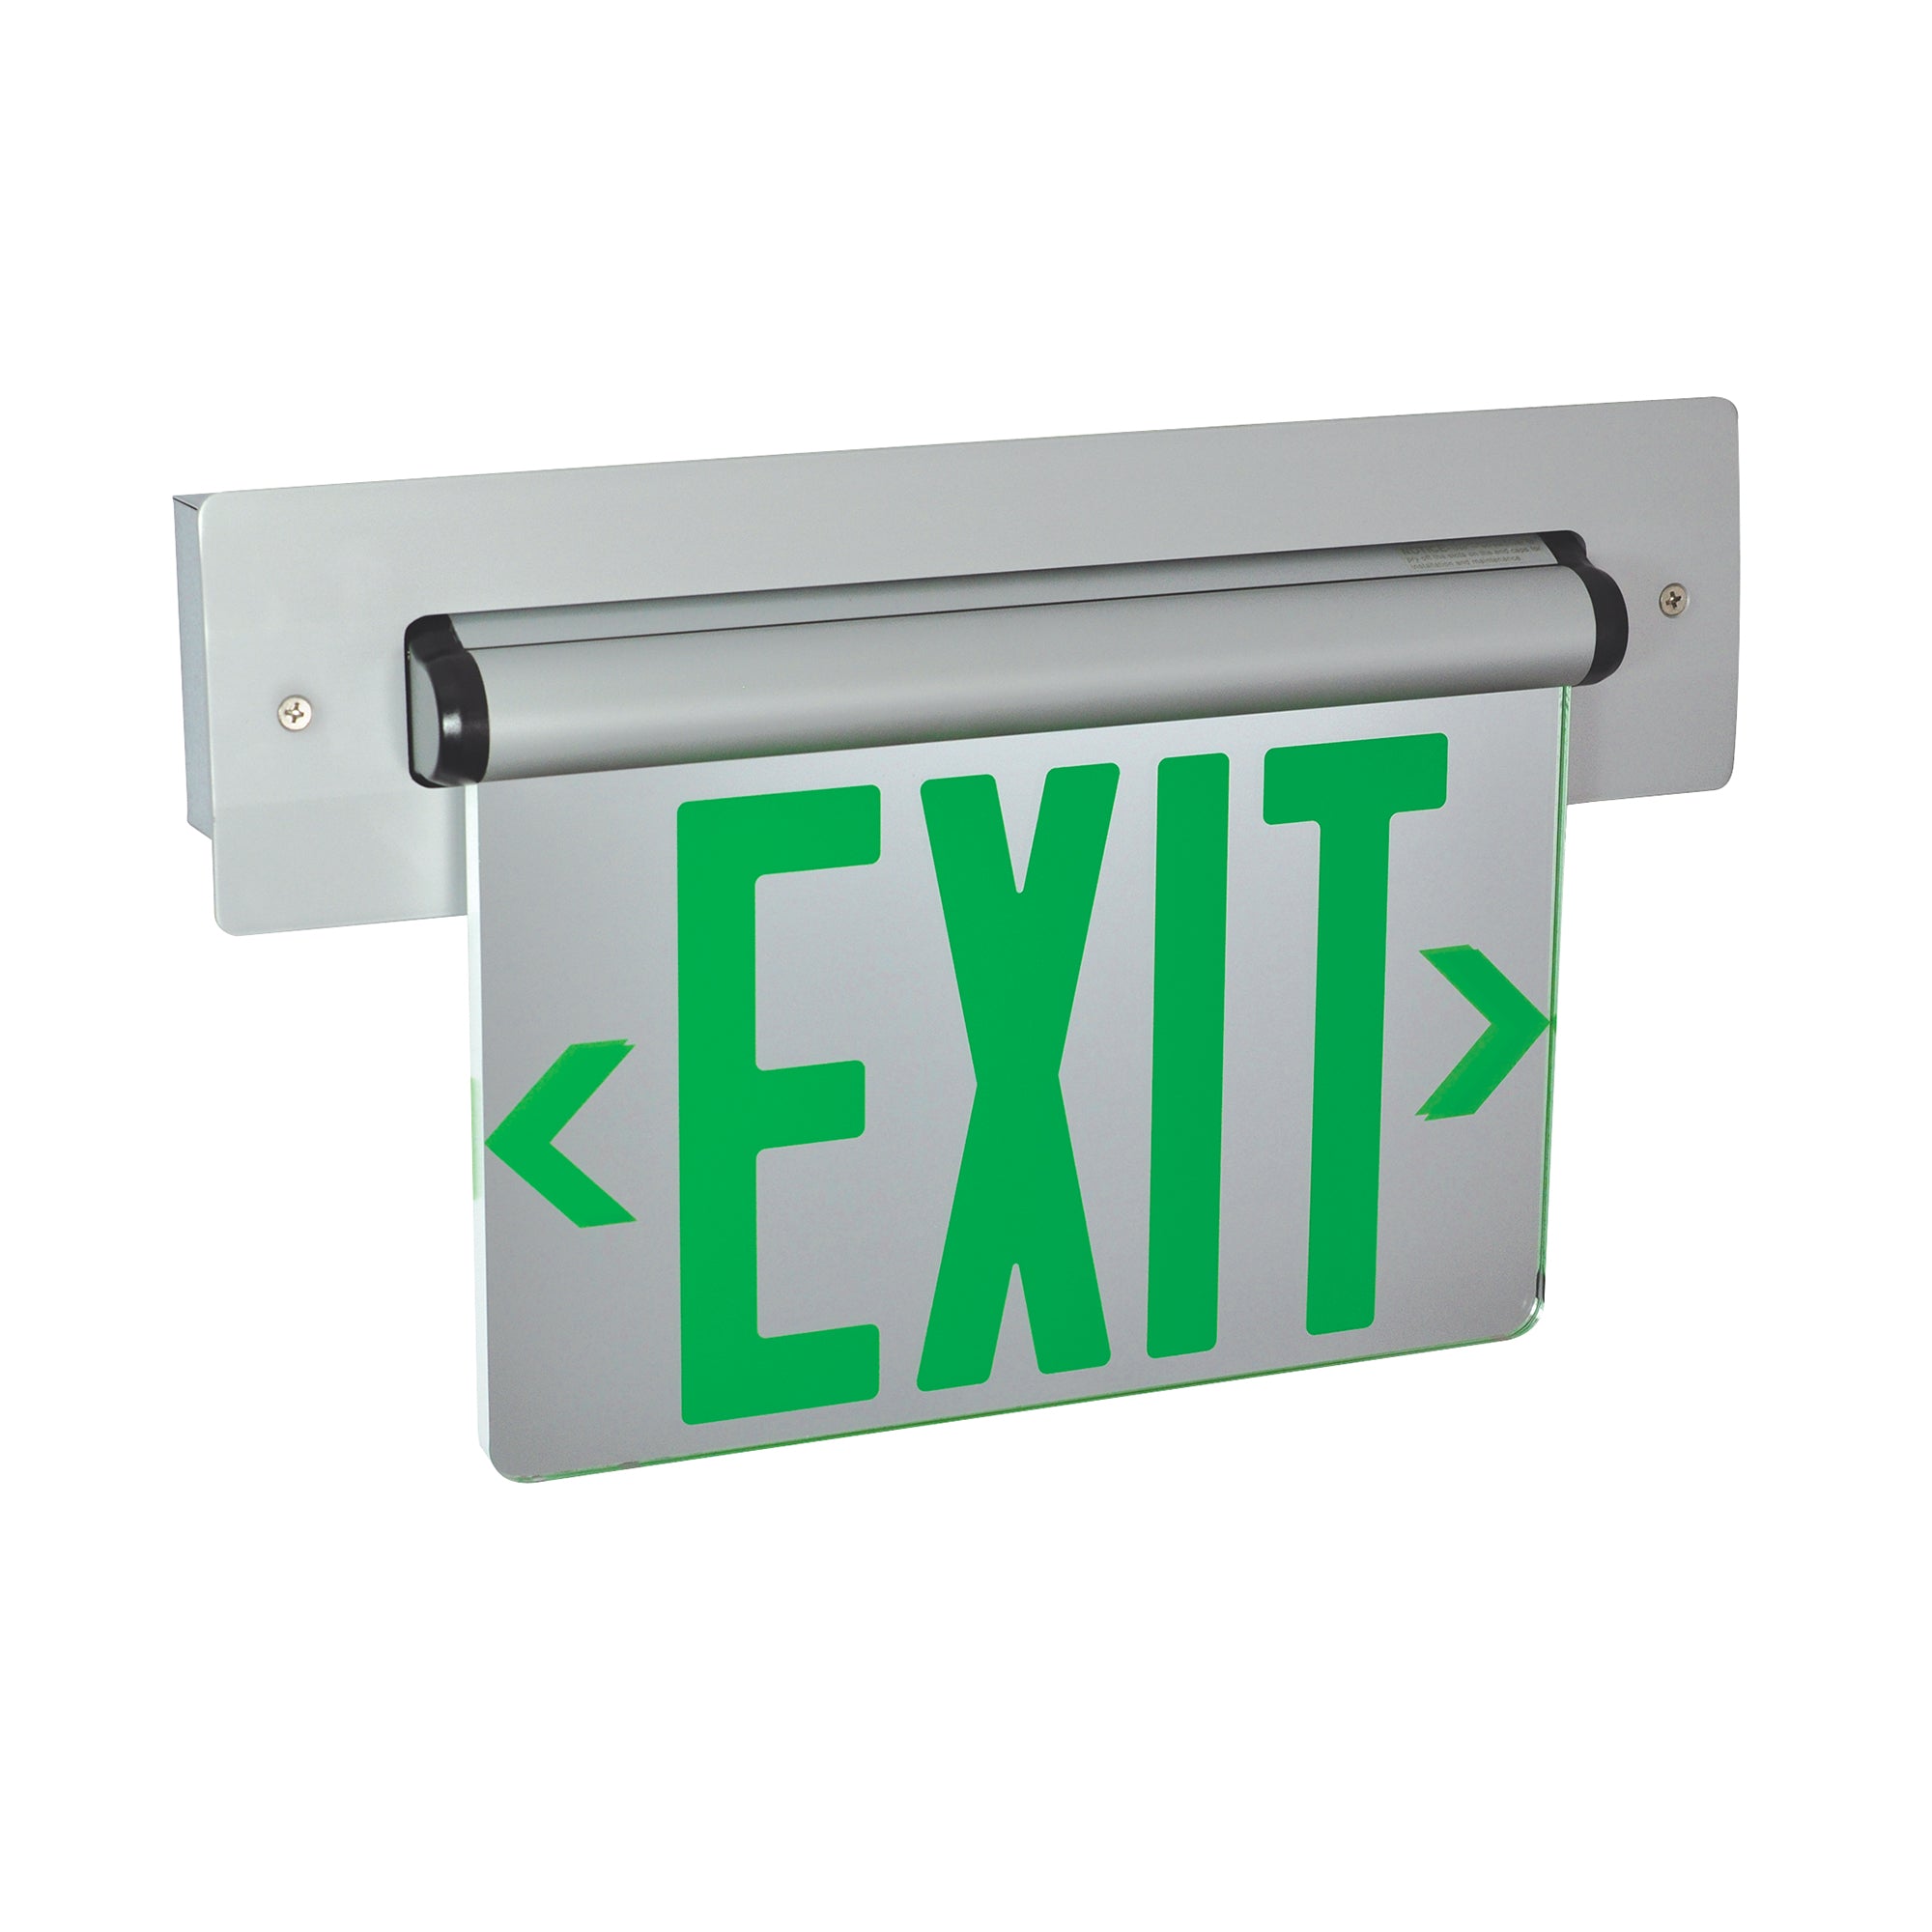 Nora Lighting NX-815-LEDG2MA - Exit / Emergency - Recessed Adjustable LED Edge-Lit Exit Sign, Battery Backup, 6 Inch Green Letters, Double Face / Mirrored Acrylic, Aluminum Housing